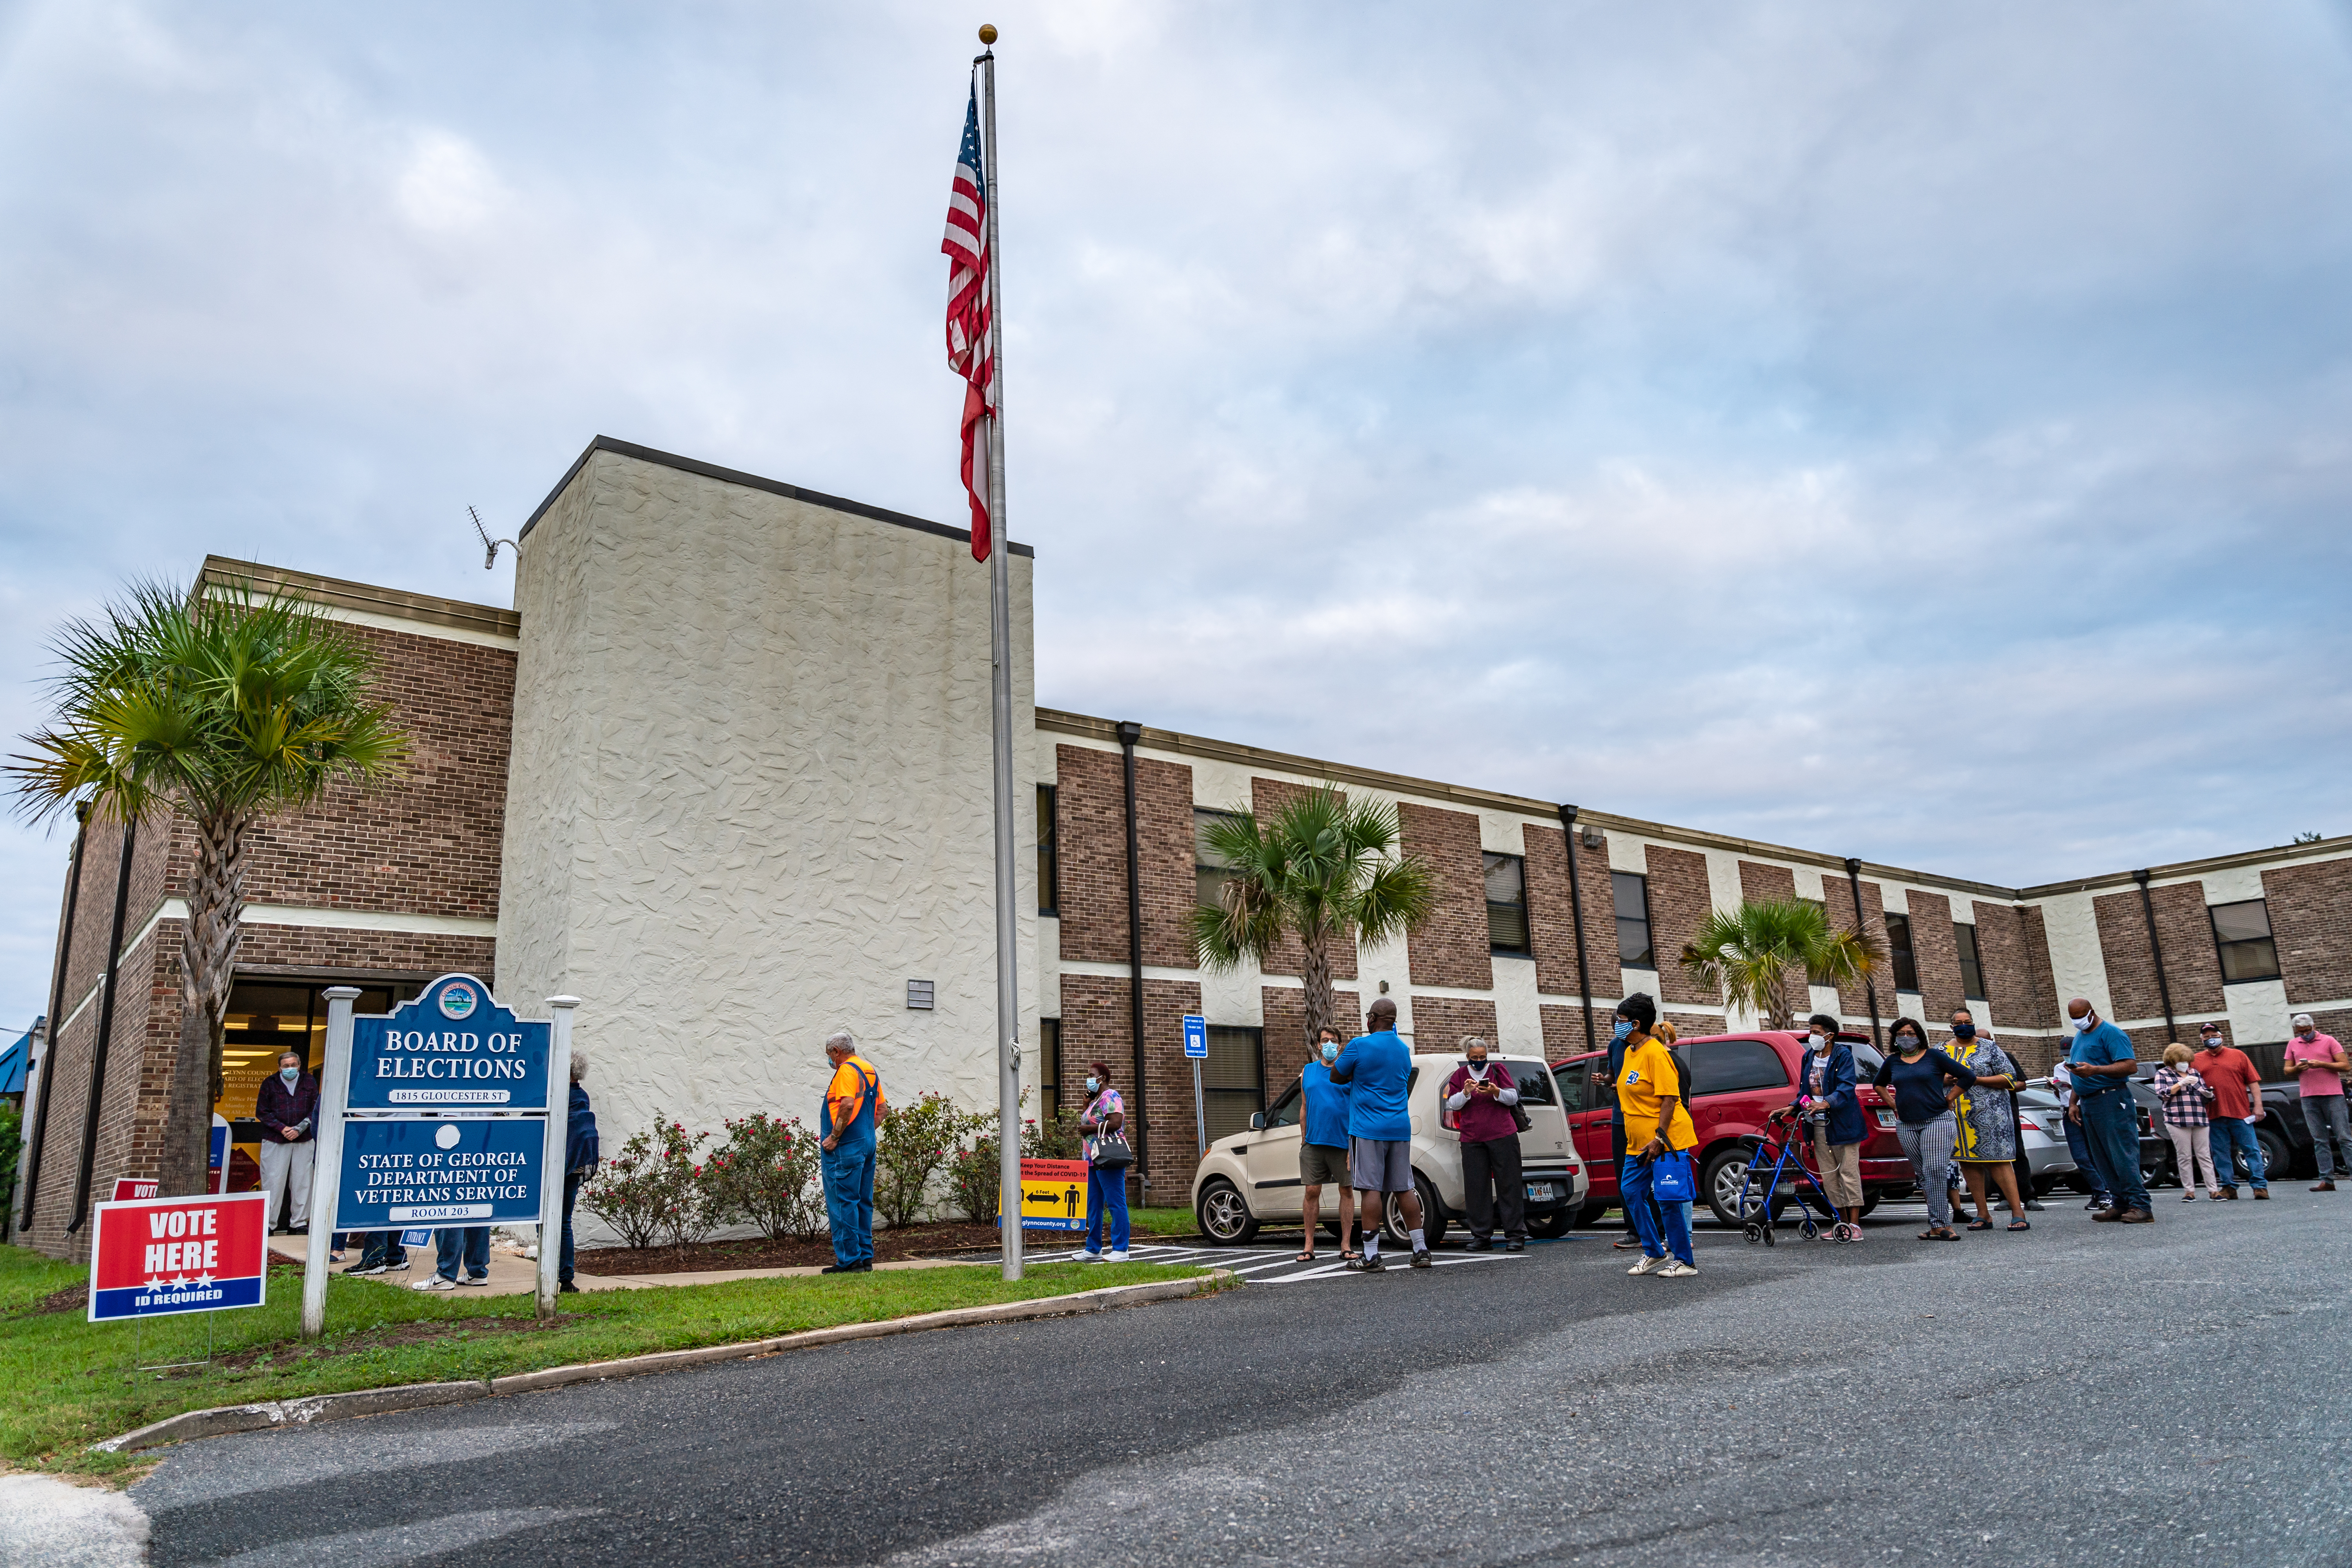 Voters line up outside a Georgia voting center in the 2020 U.S. Presidential election (Shutterstock).